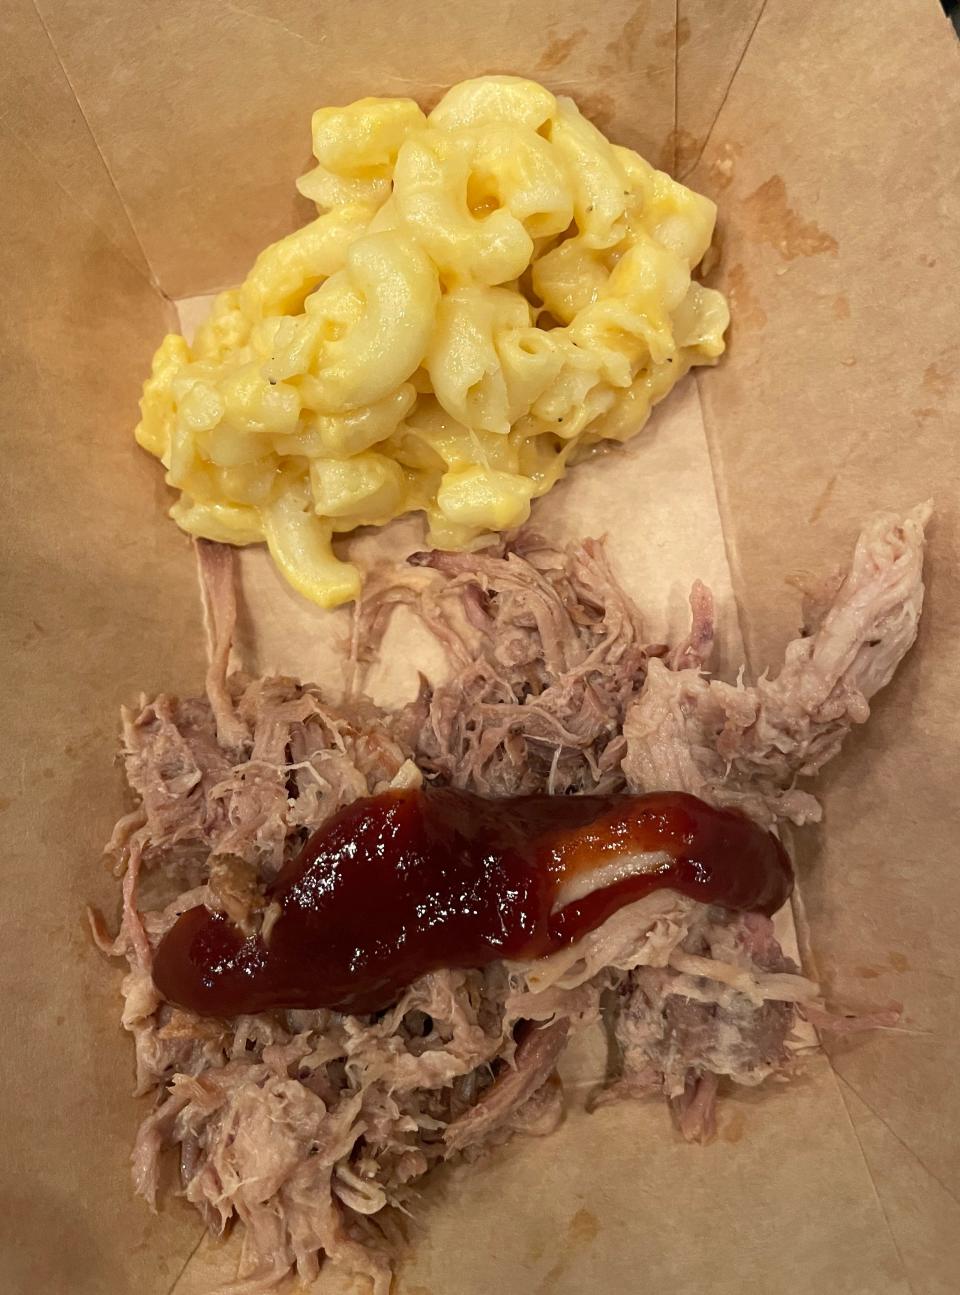 Kennedy's Bar-B-Que offered pulled pork and macaroni and cheese.